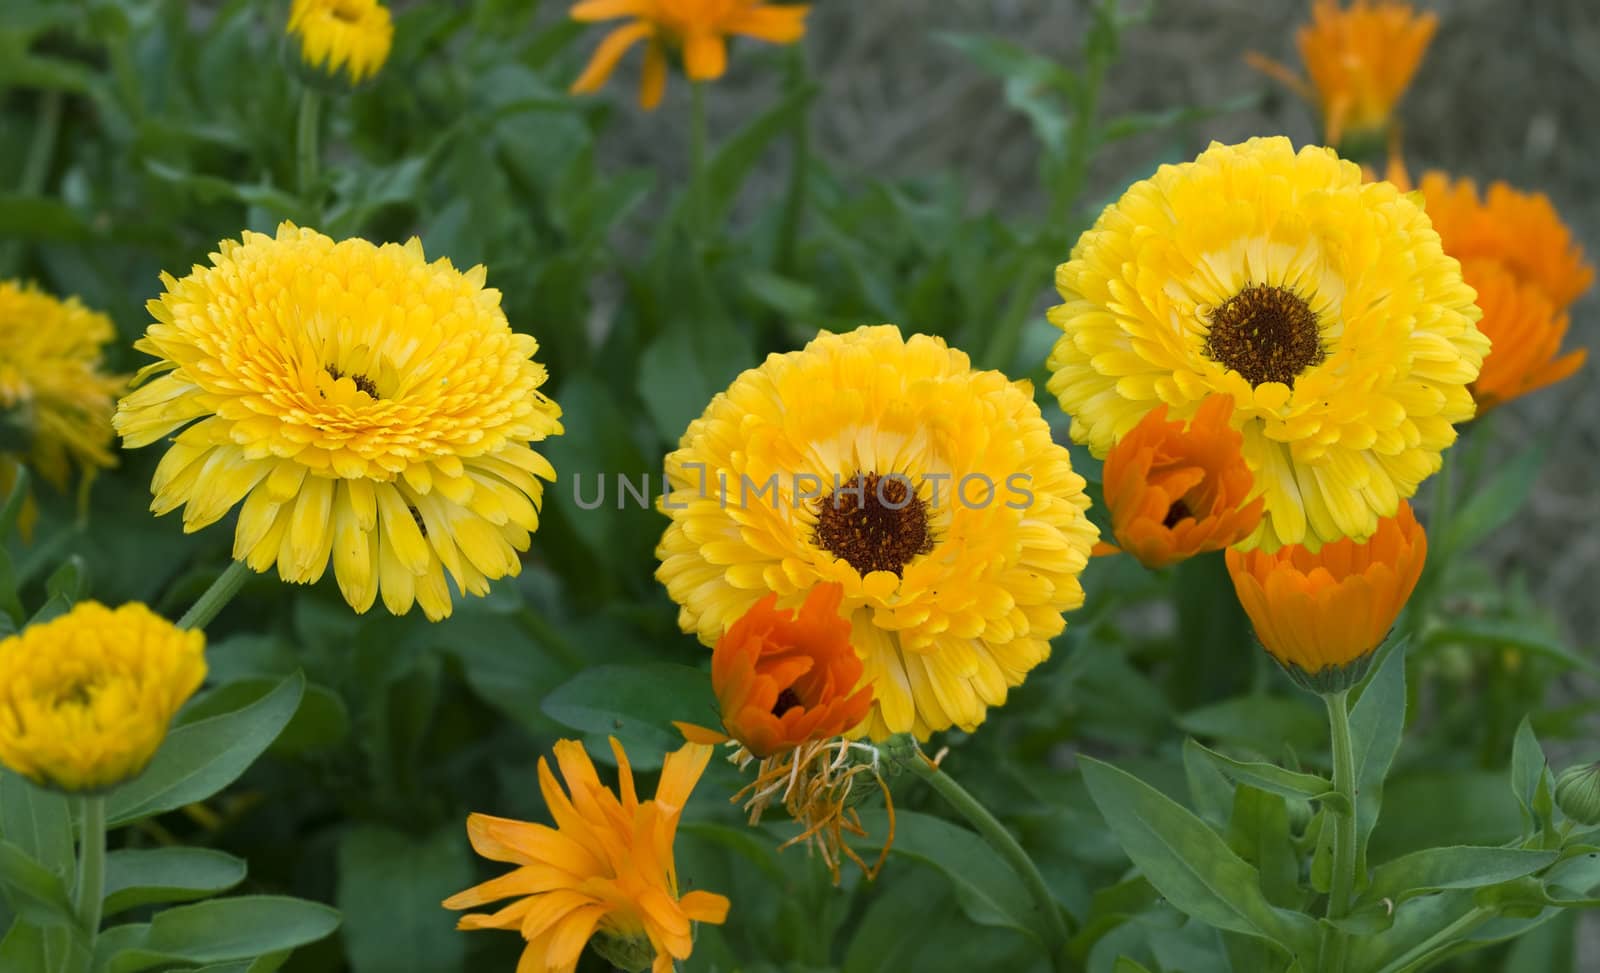 colorful spring flower garden bright golden yellow calendula marigolds and green foliage